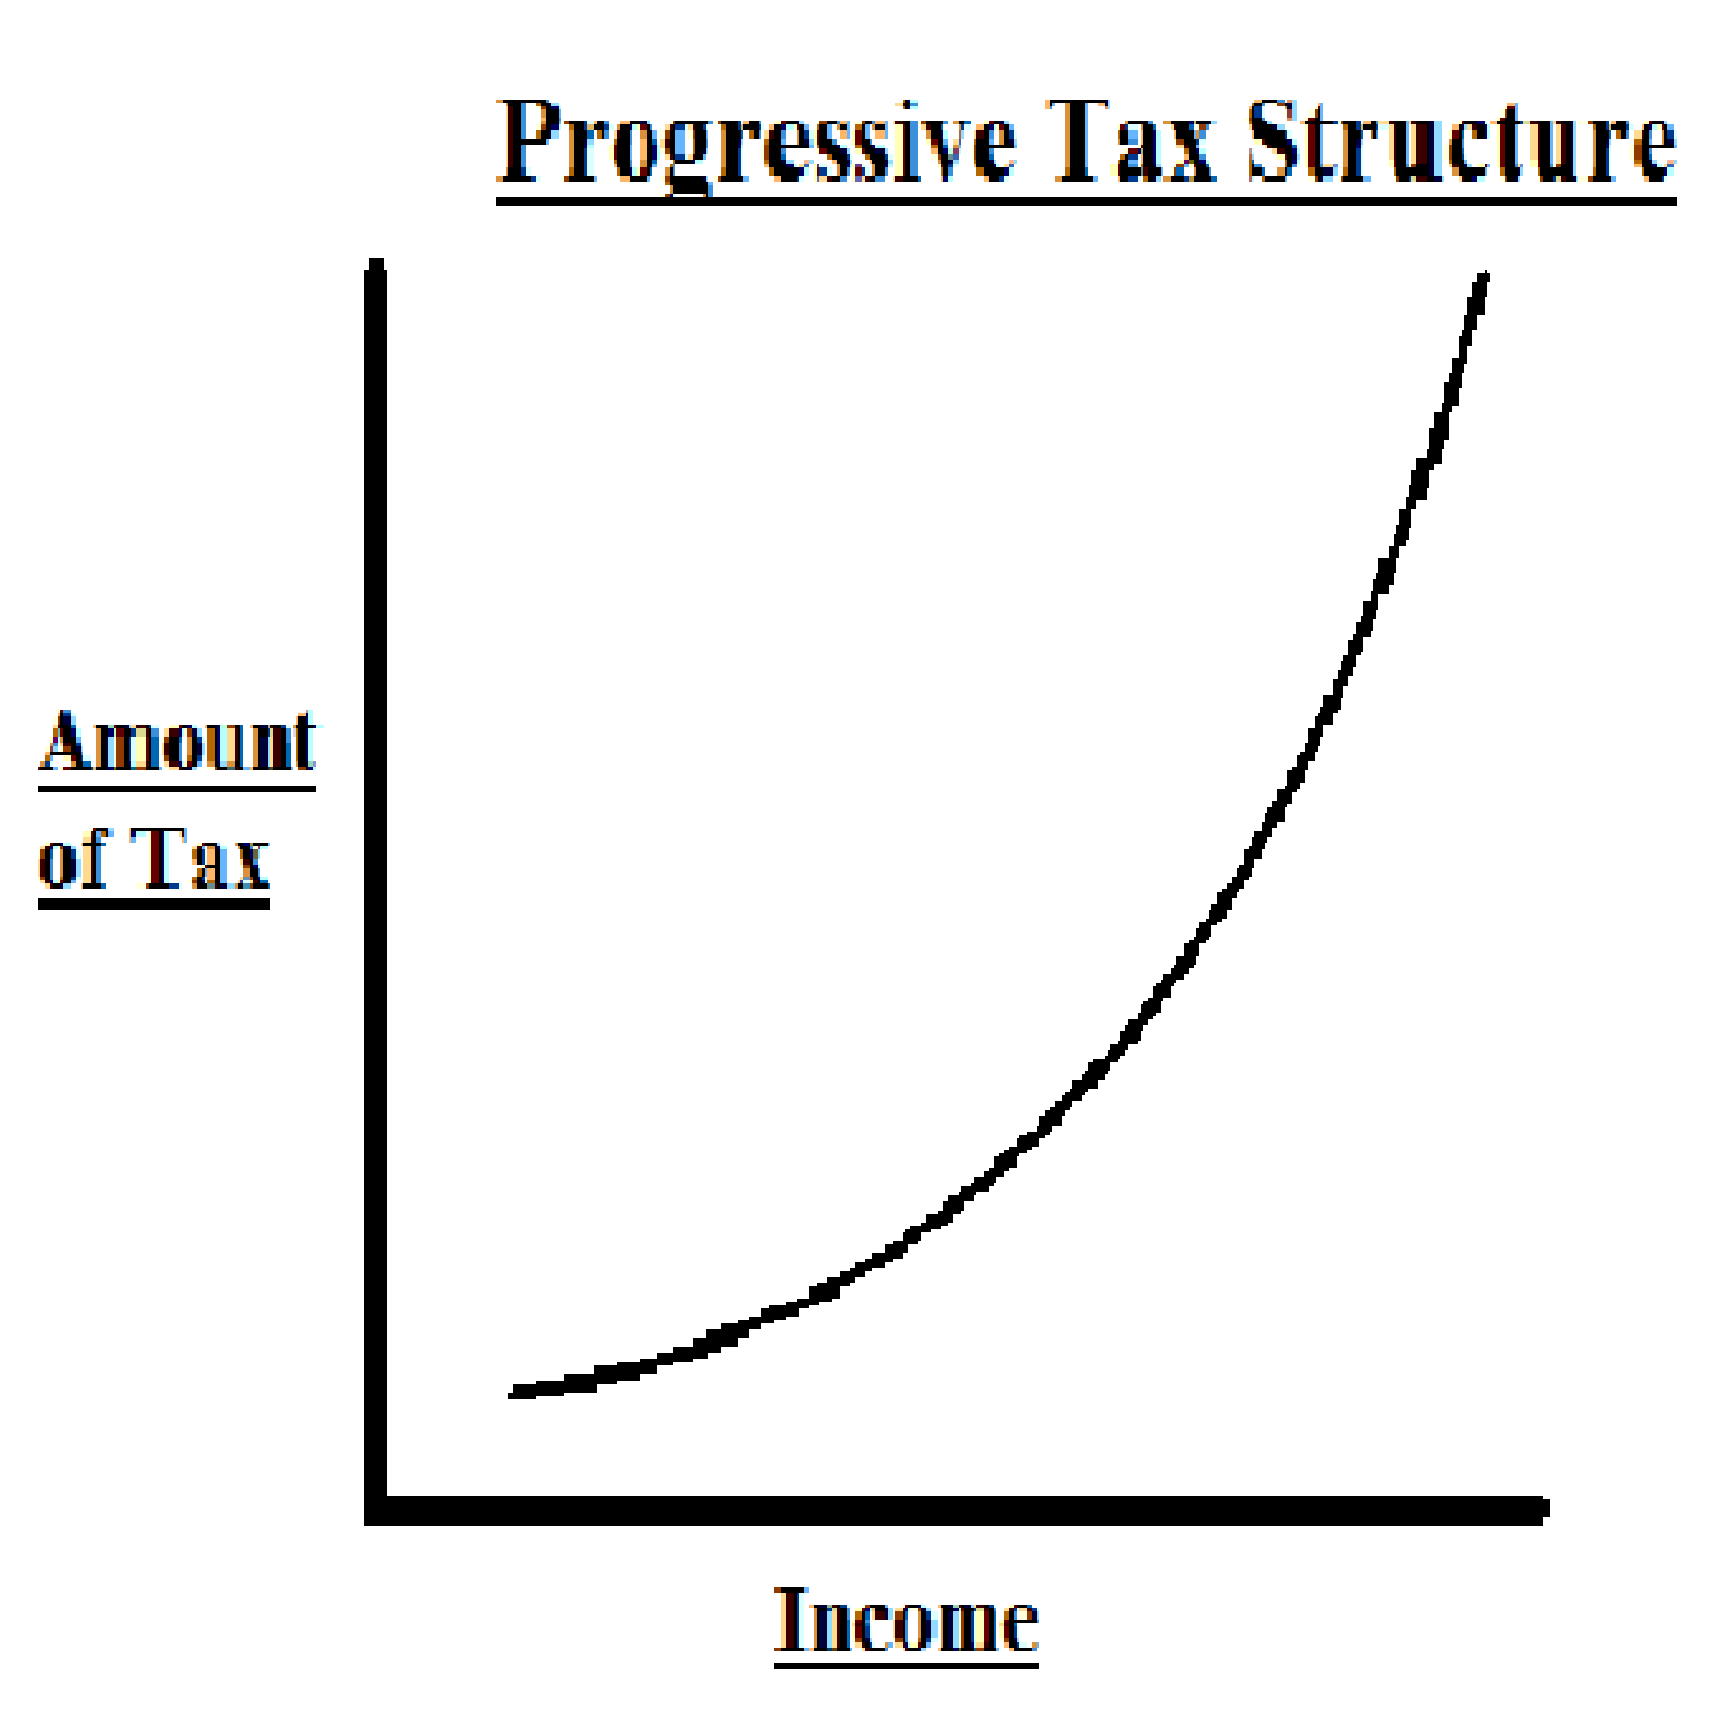 in a proportional income tax system